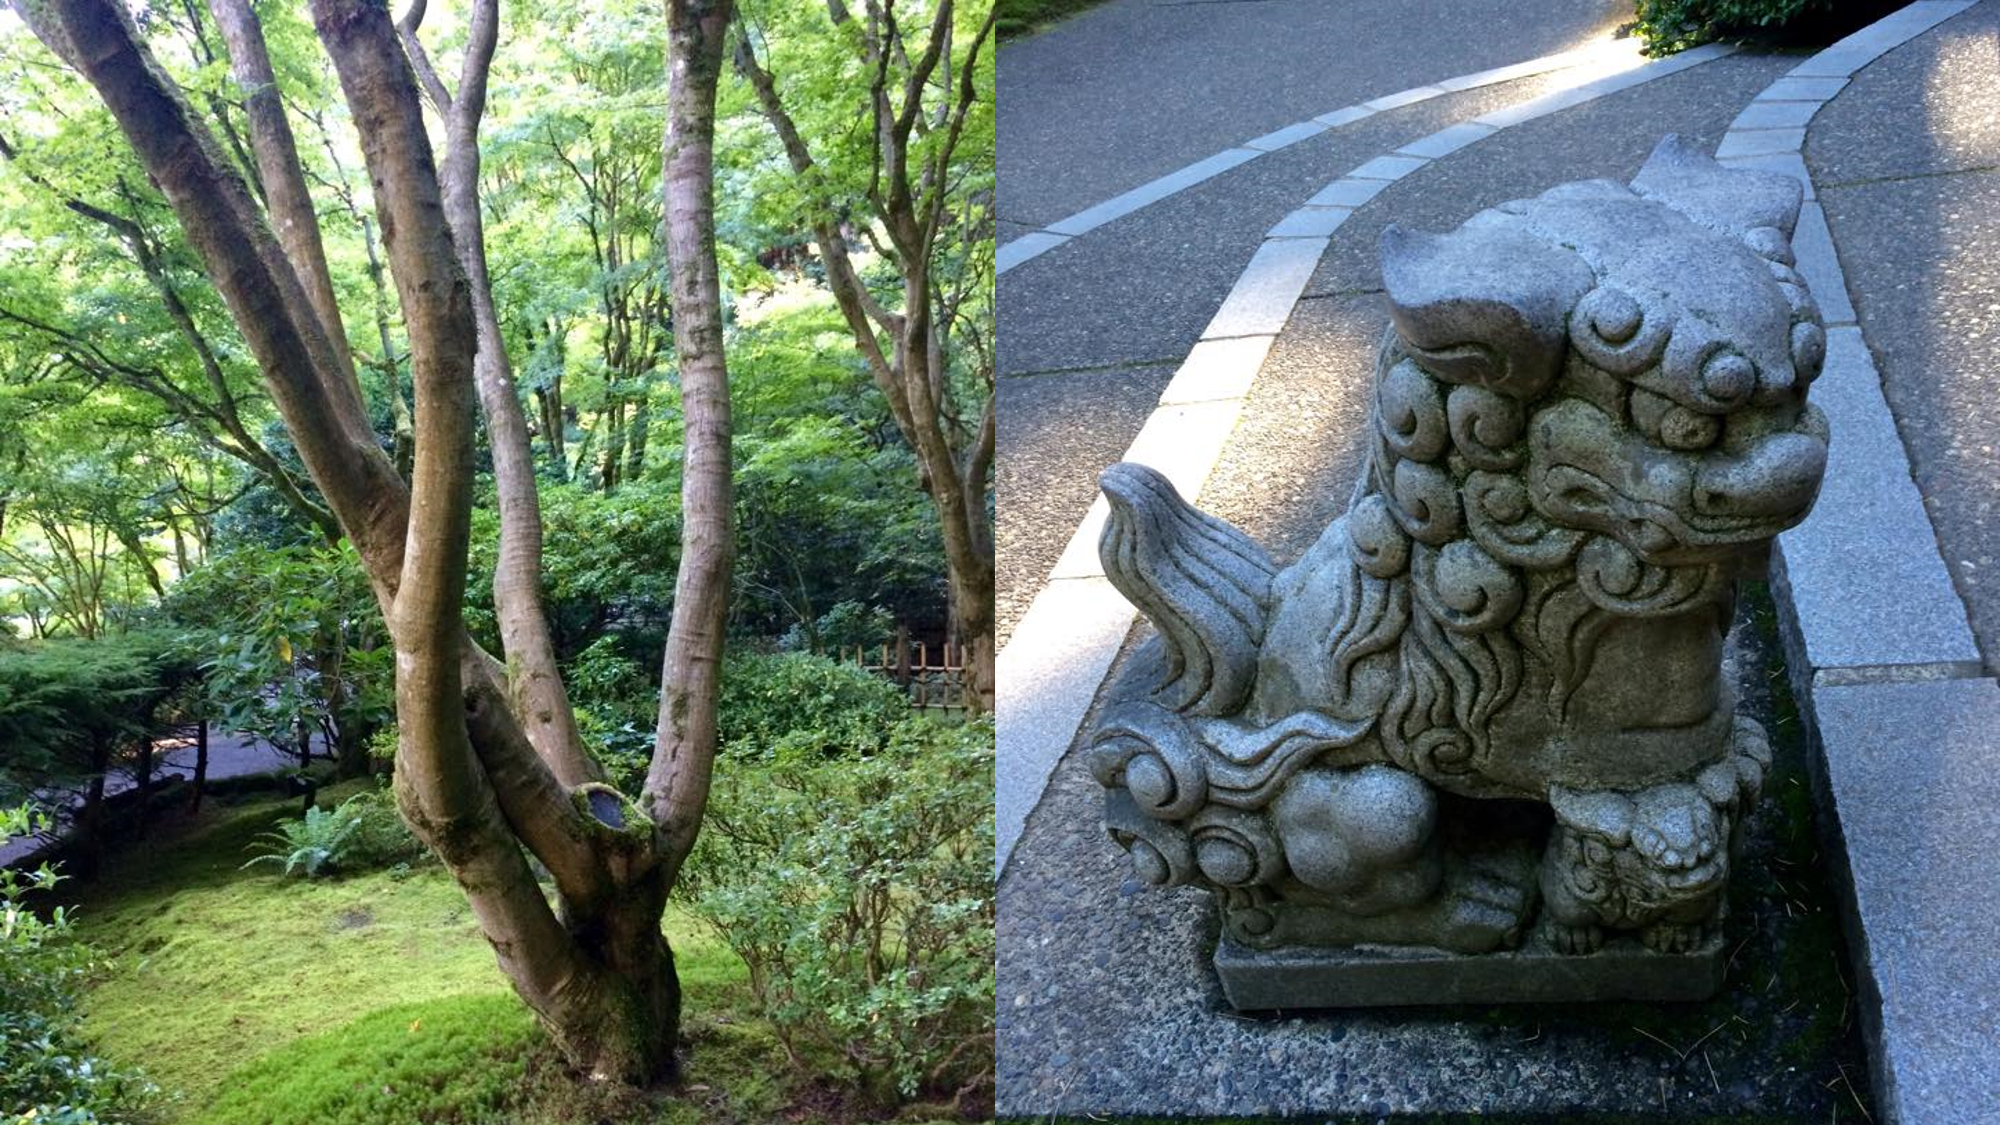 Photos taken at the Japanese gardens in Portland, OR - one of a tree surrounded by green moss and foliage, second of a dragon statue